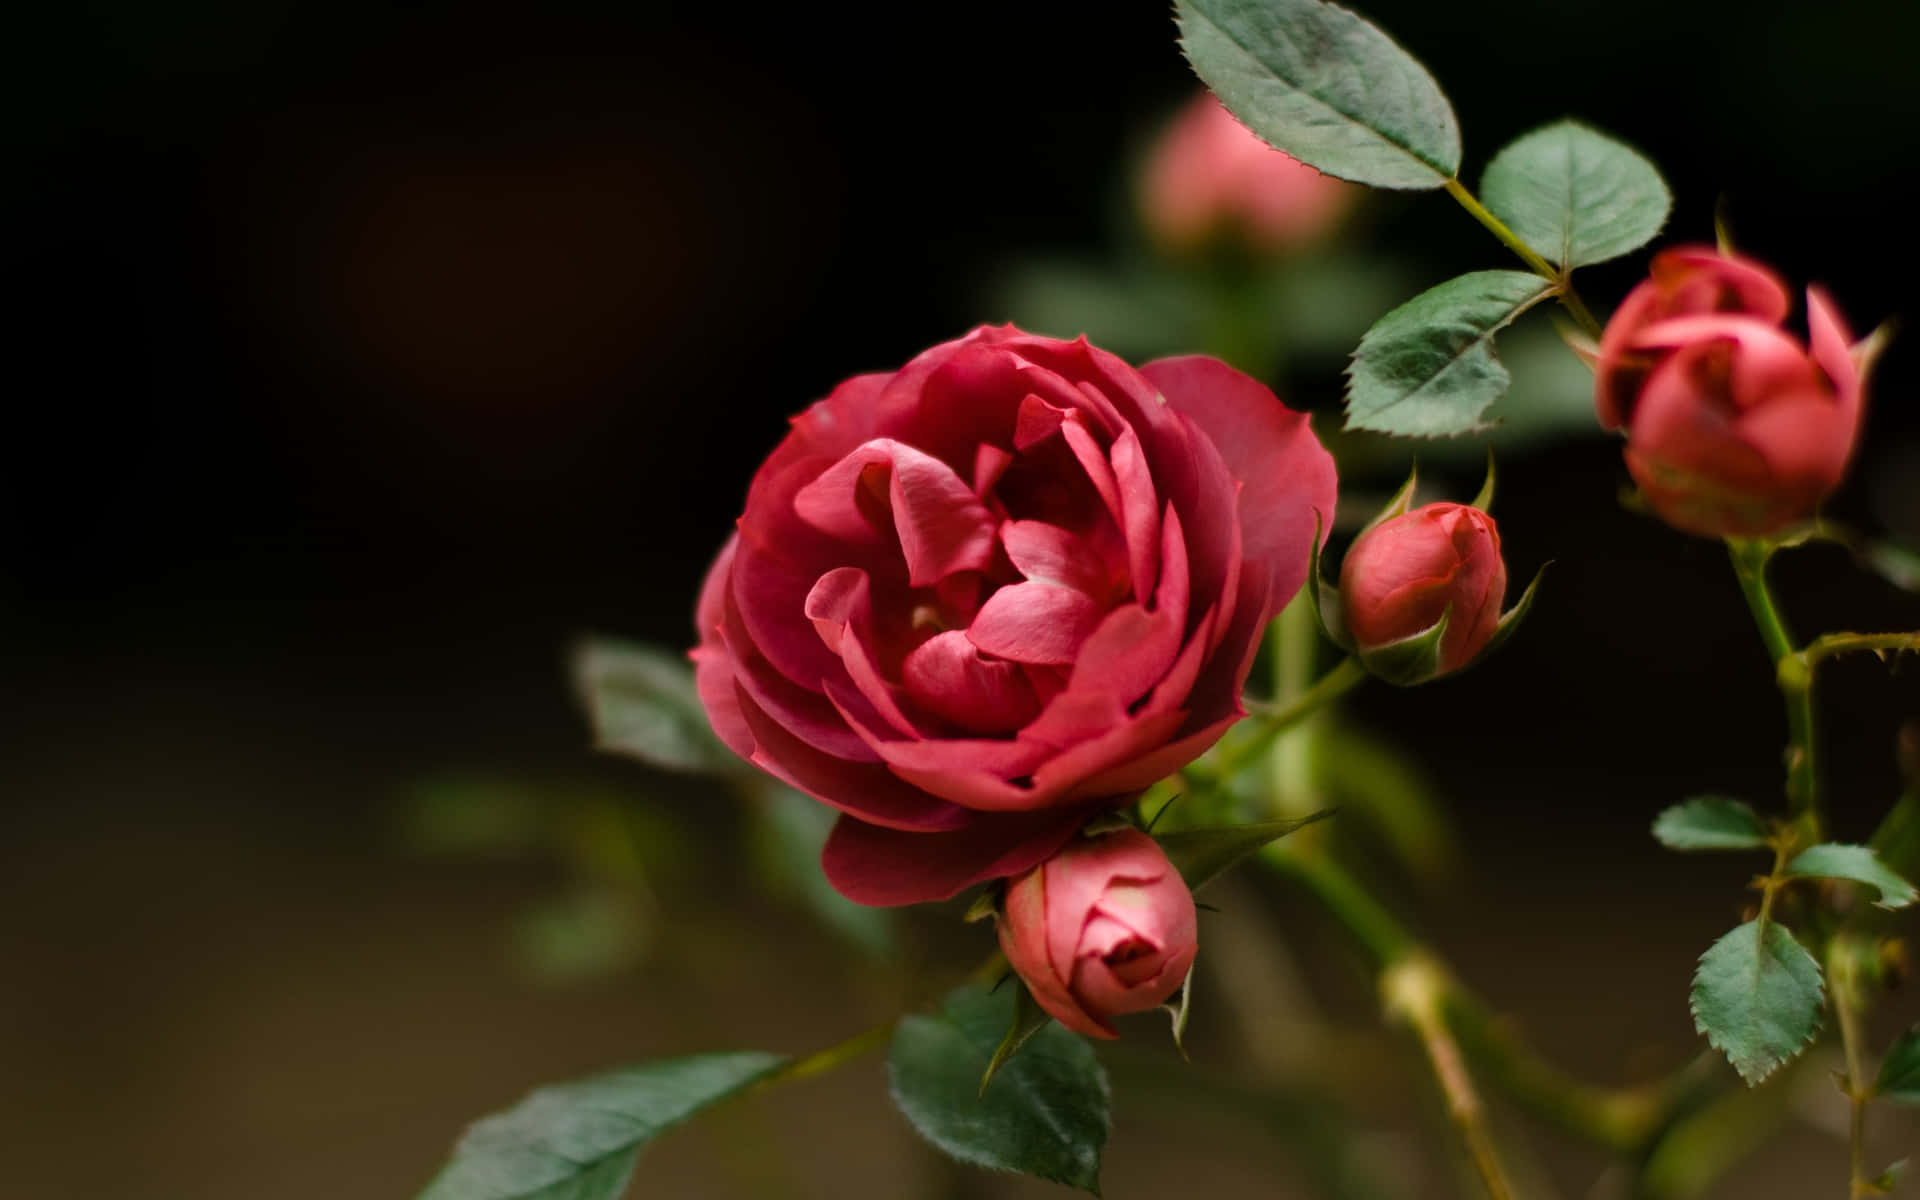 A beautiful rose surrounded by vibrant petals Wallpaper